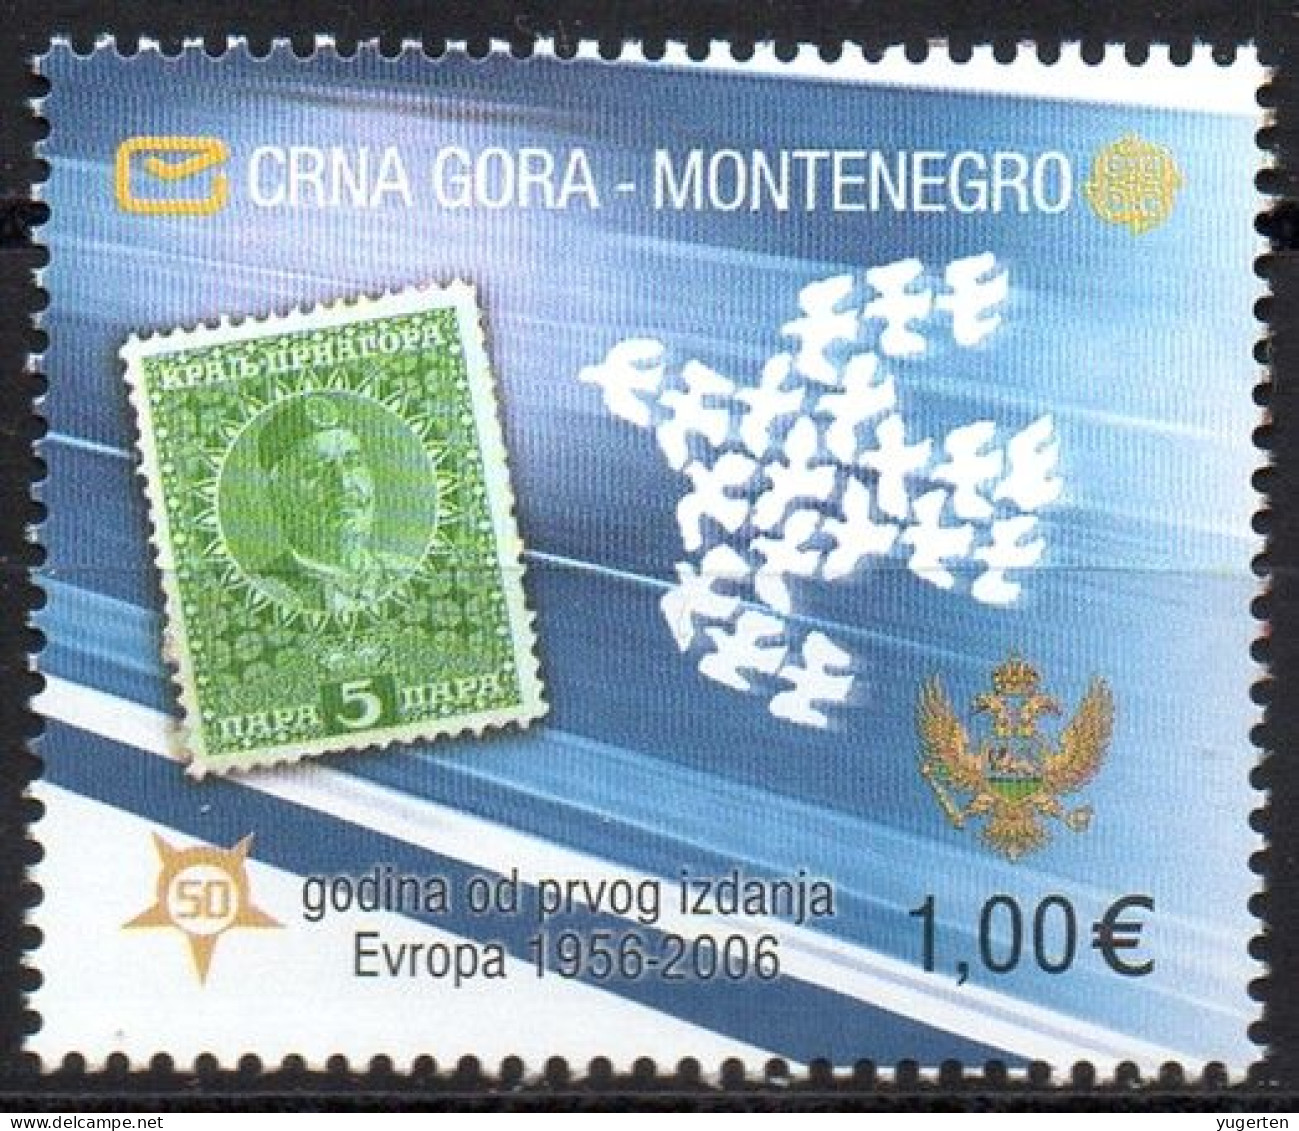 MONTENEGRO 2006 - 1v - MNH - Europa 50 Years Anniv.- Colombe - Pigeon - Peace - Paix - Dove - Stamps On Stamps Taube - Pigeons & Columbiformes